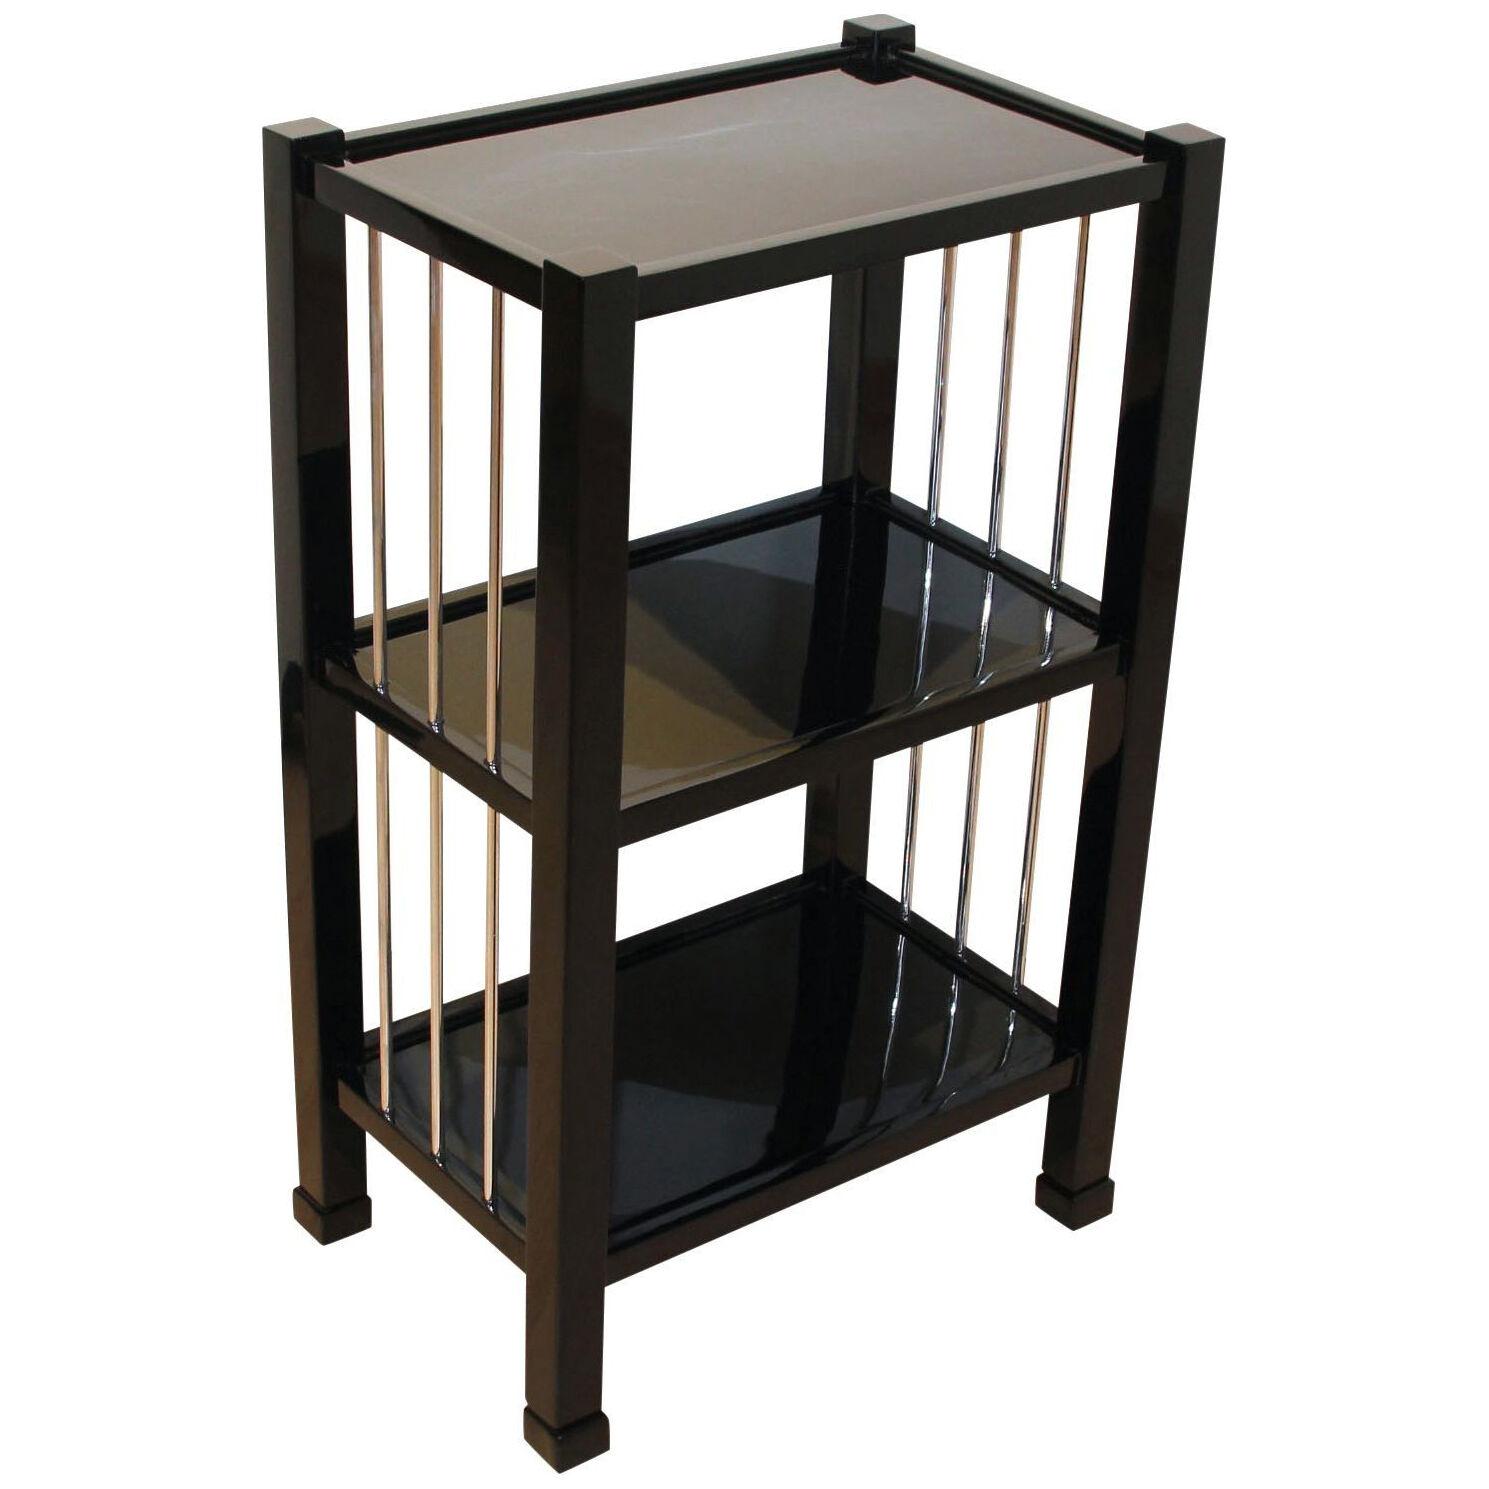 Art Deco Etagere or Shelf, Black lacquer and Metal, France circa 1930